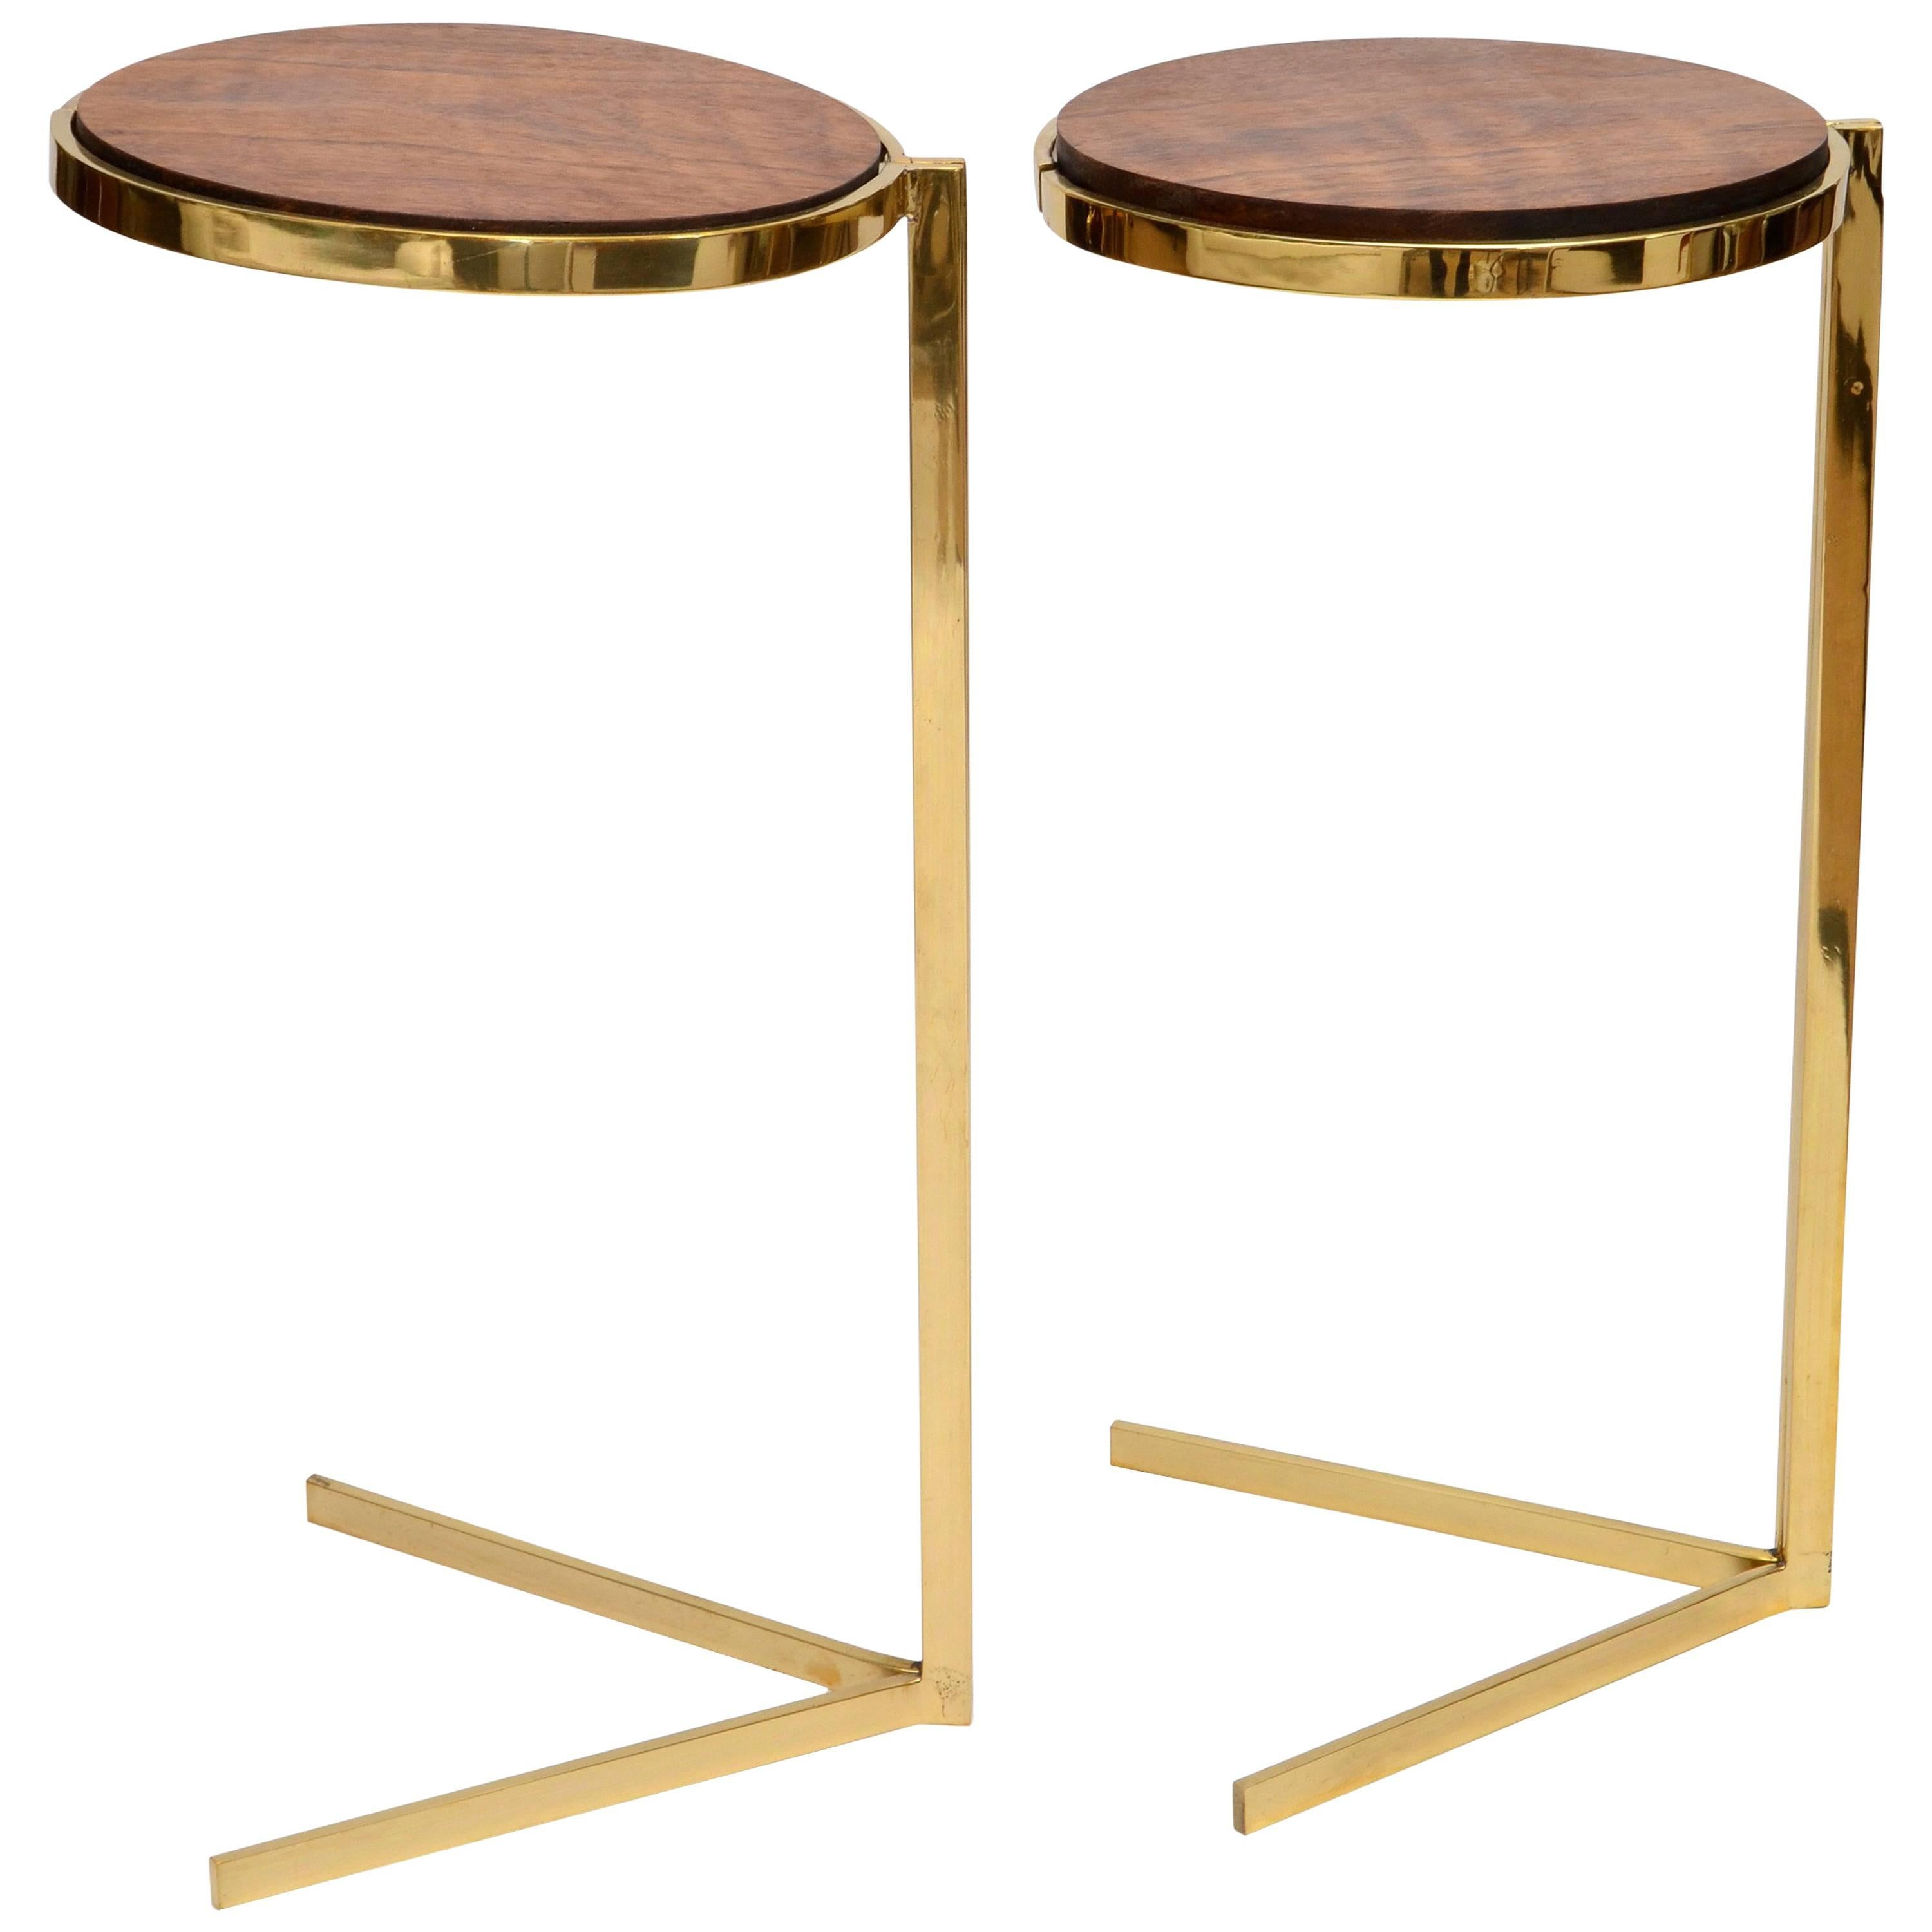 Art Deco Personal Brass with Wooden Top Side Tables